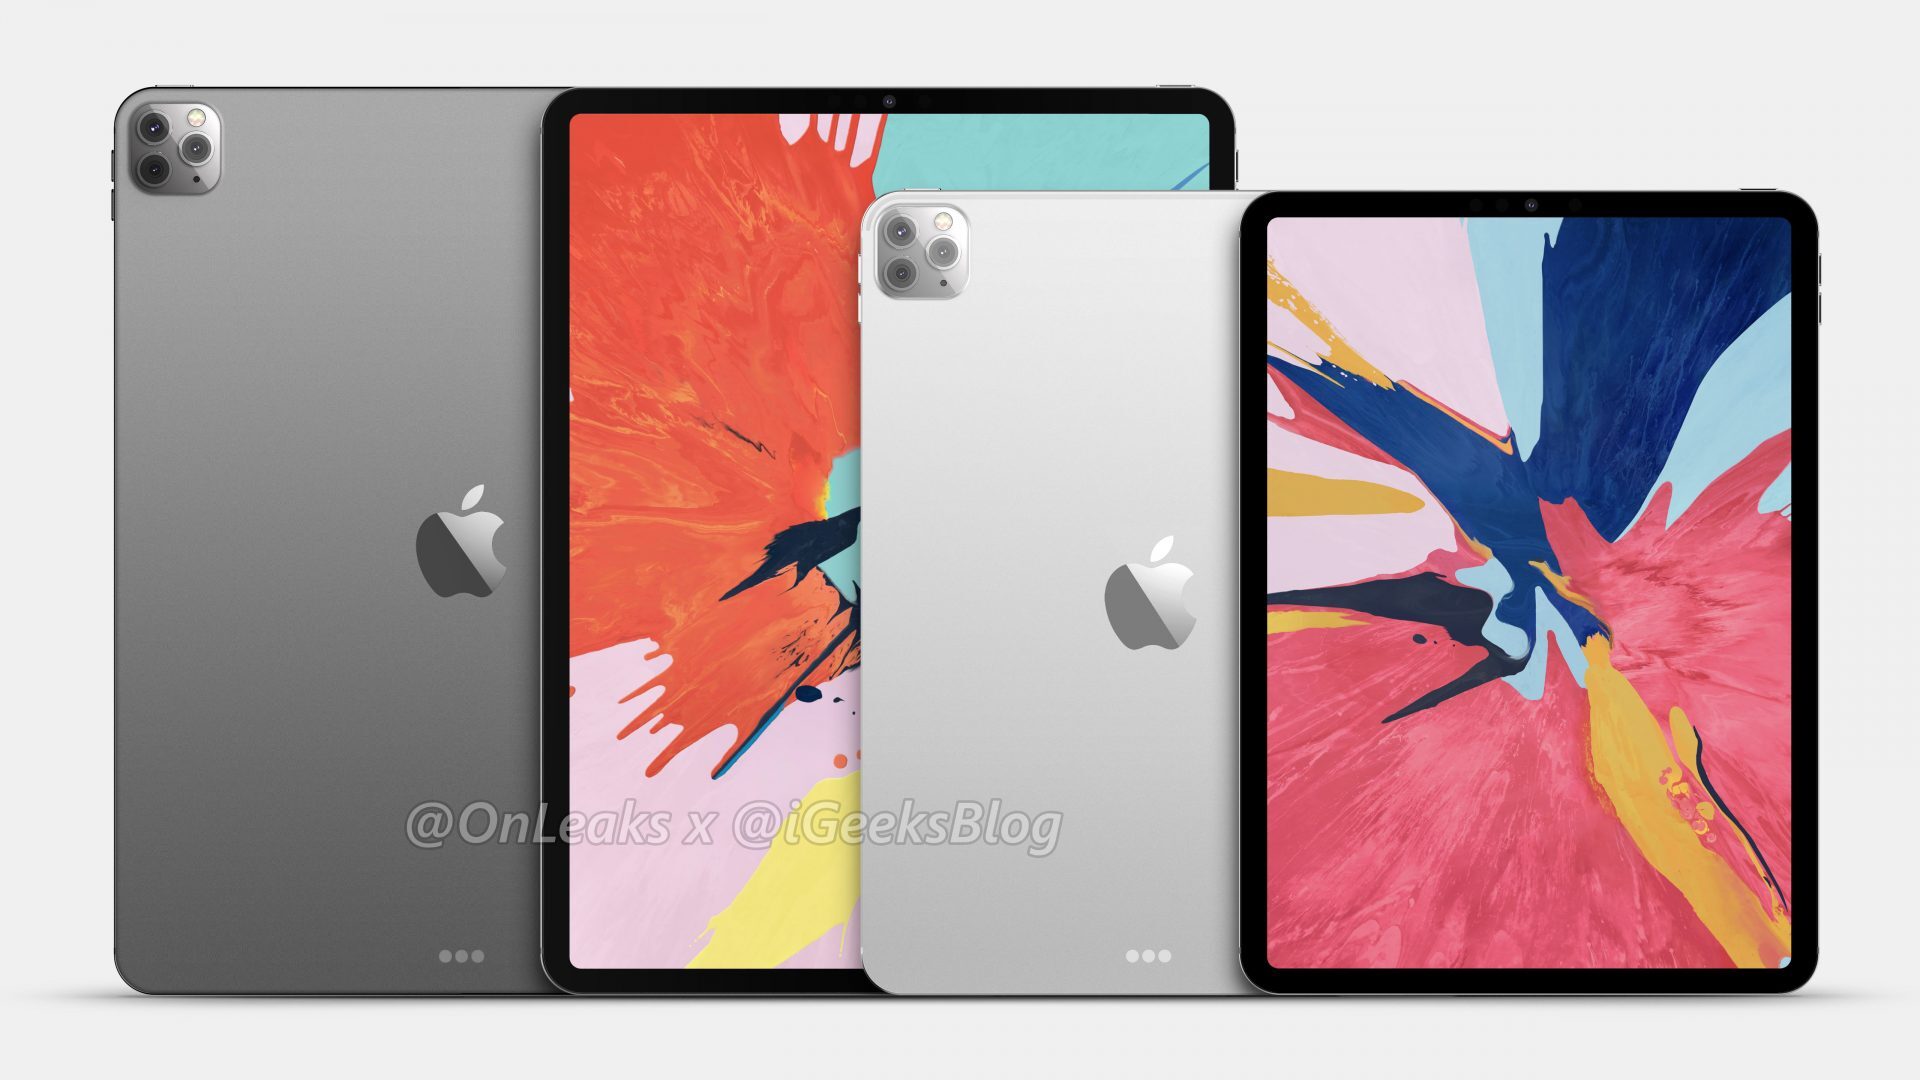 2020 Apple iPad Pro CAD-based render - Big 2020 iPad Pro camera upgrade teased by reliable Apple tipster